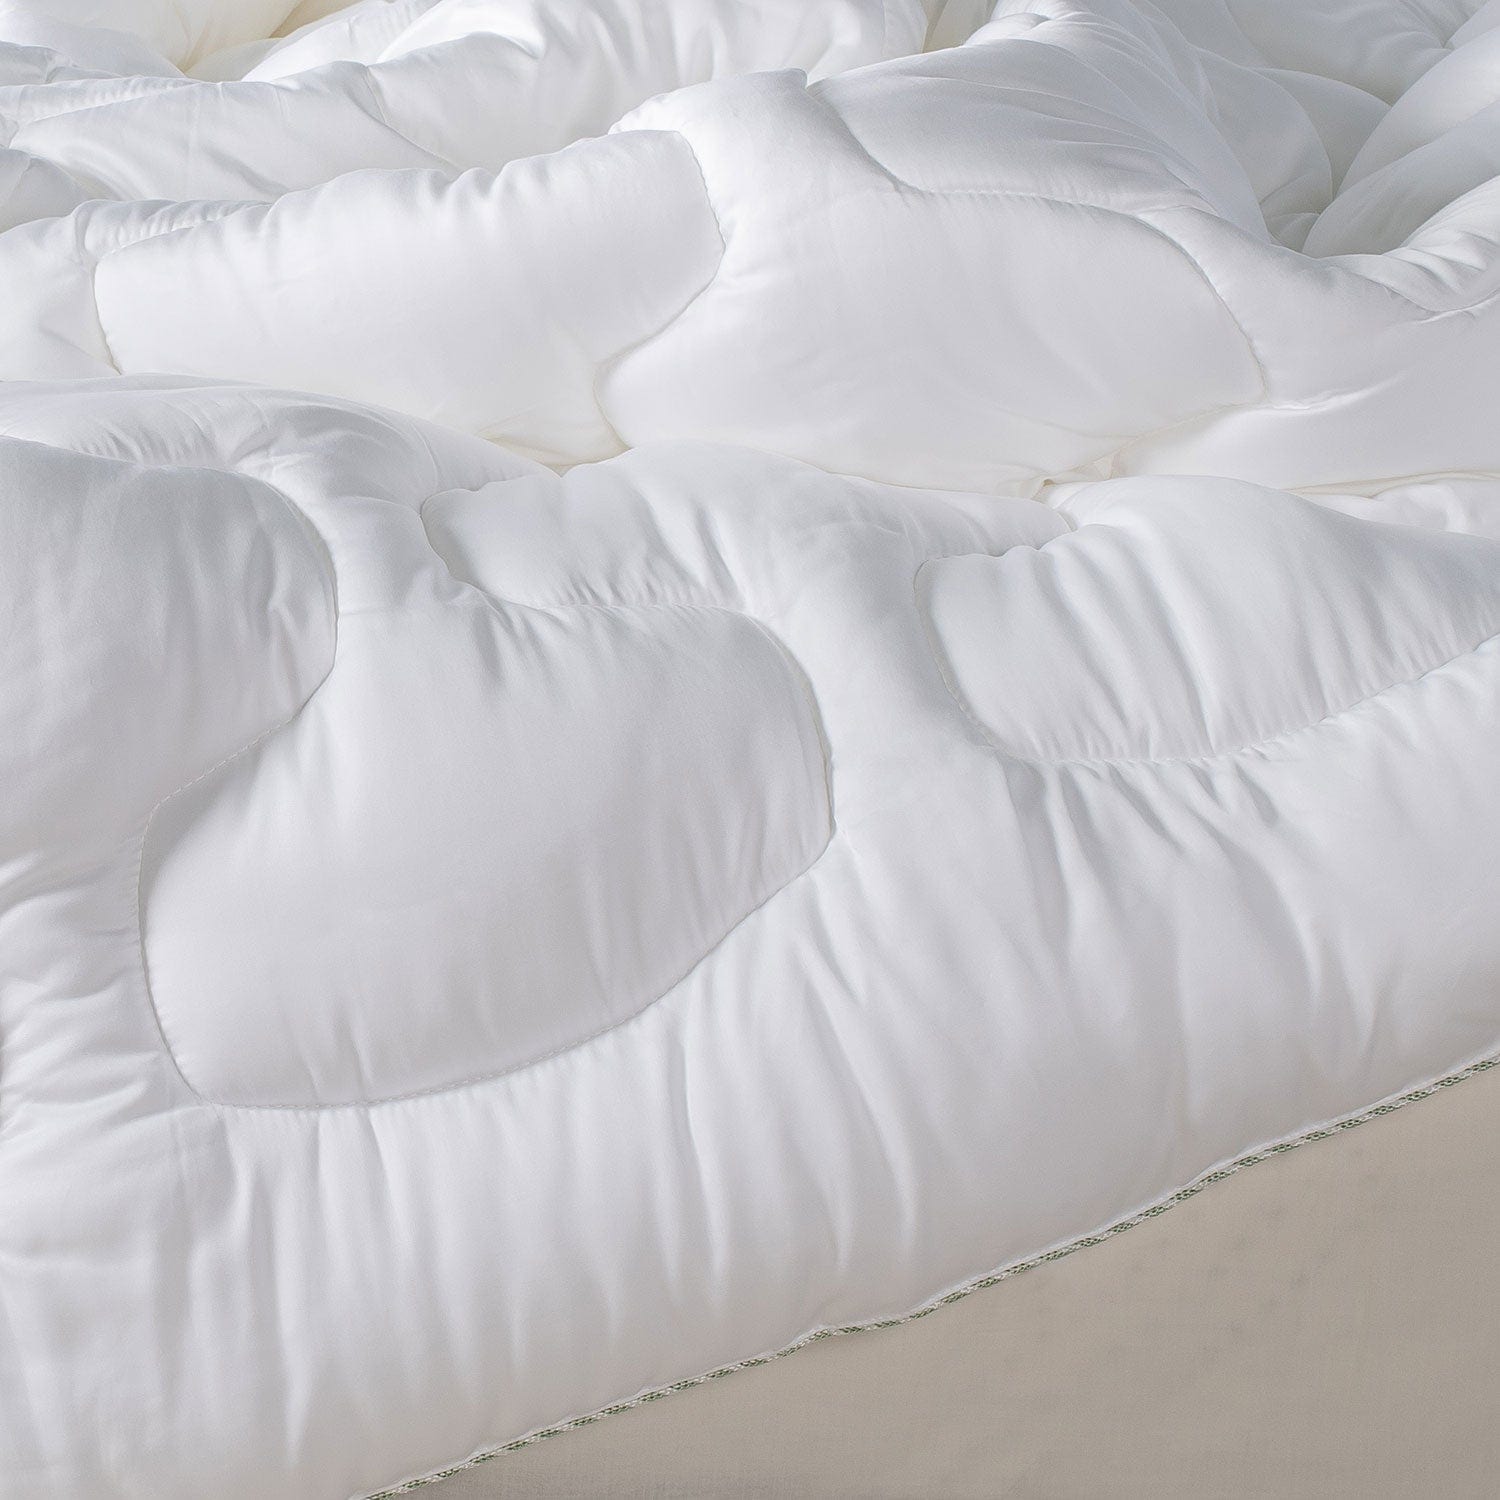 LIGHTWEIGHT SUMMER QUILT/COMFORTER WITH NATURAL WOOD PULP TENCEL™ - TENCEL QUILT ( CERTIFIED BY A SWISS LABORATORY)